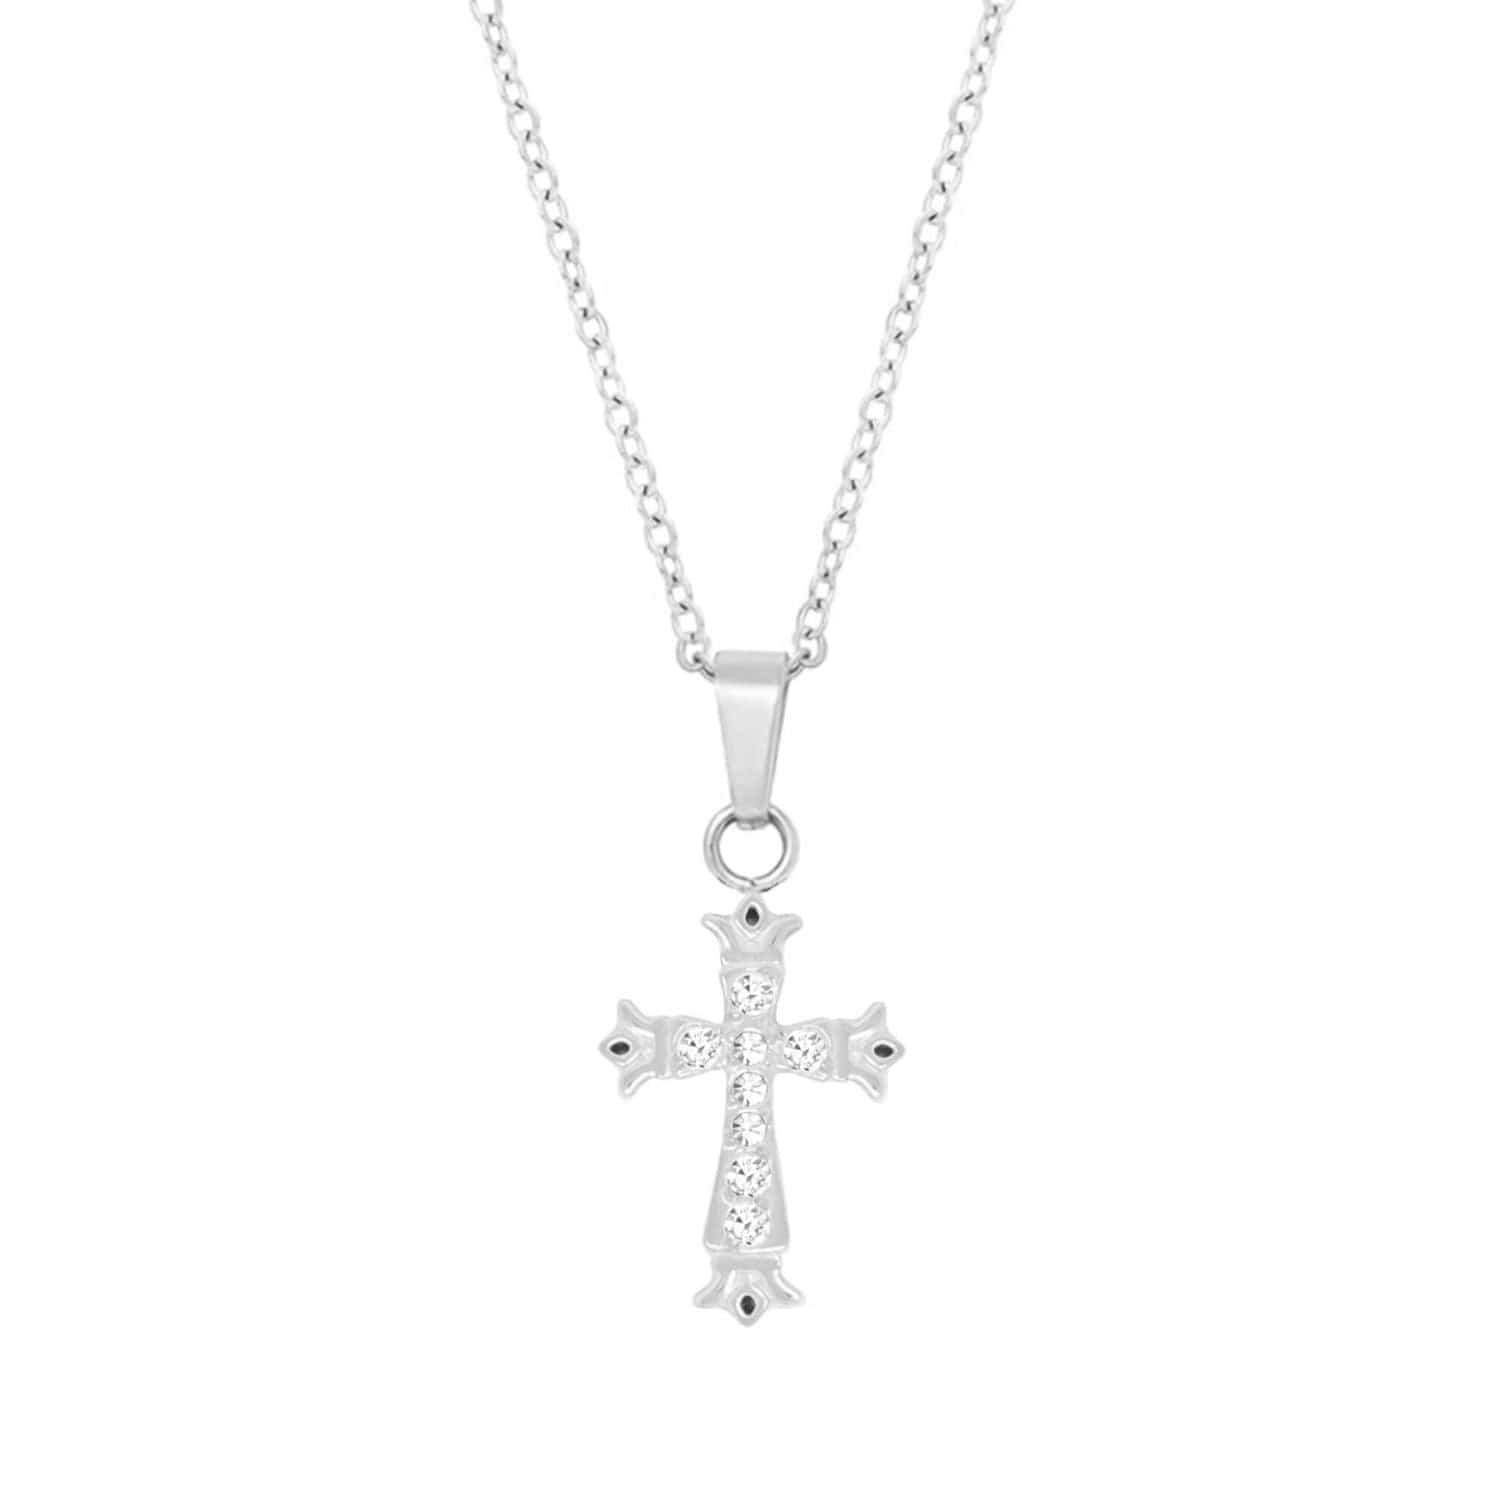 BohoMoon Stainless Steel Natalya Cross Necklace Silver